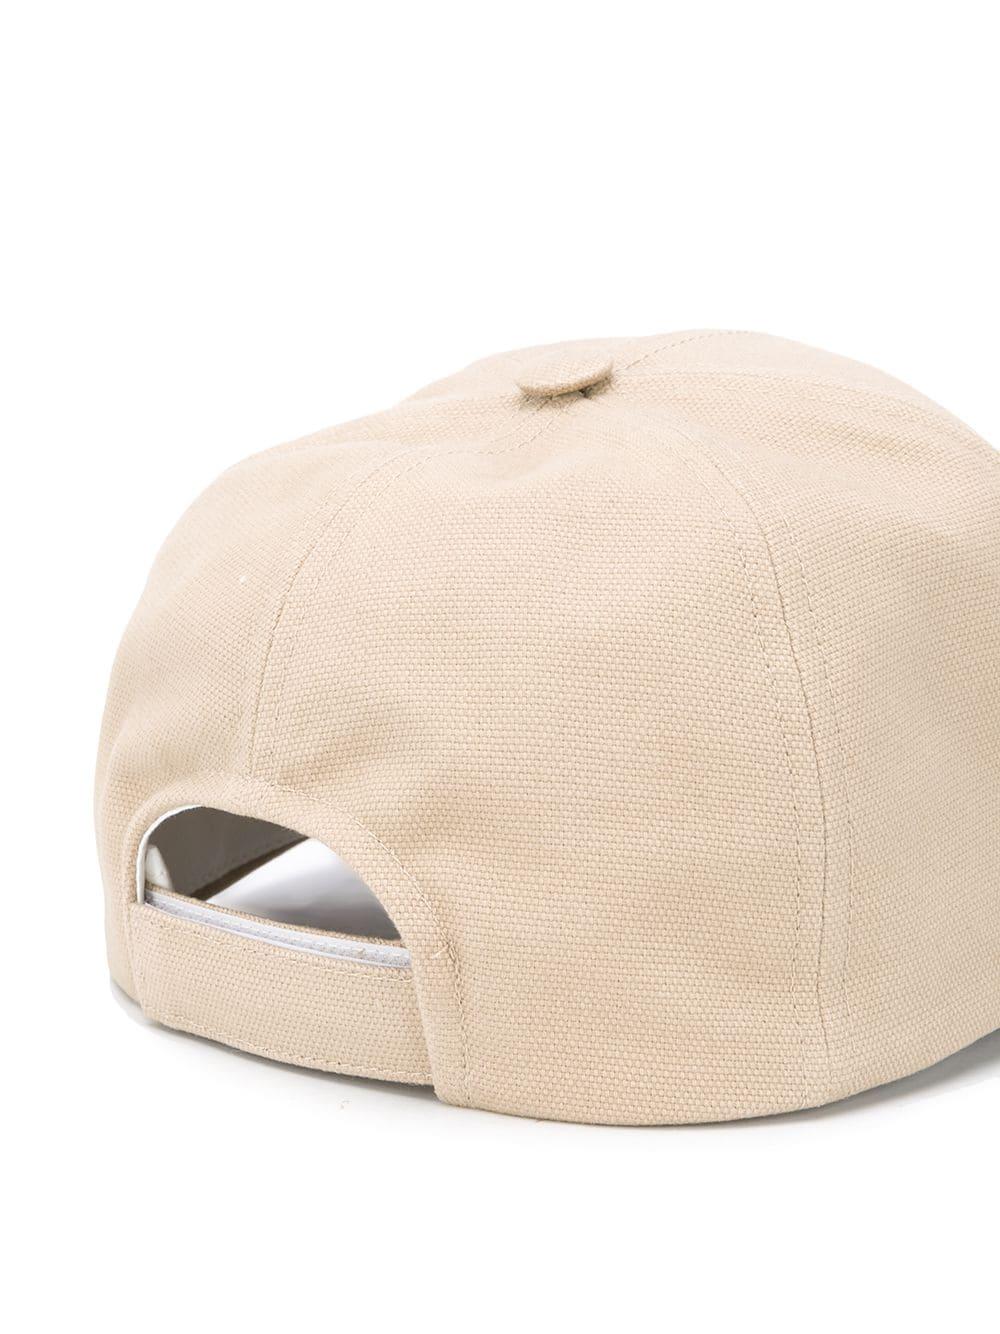 Isabel Marant Tyron Cotton Logo Cap in Natural for Men - Lyst